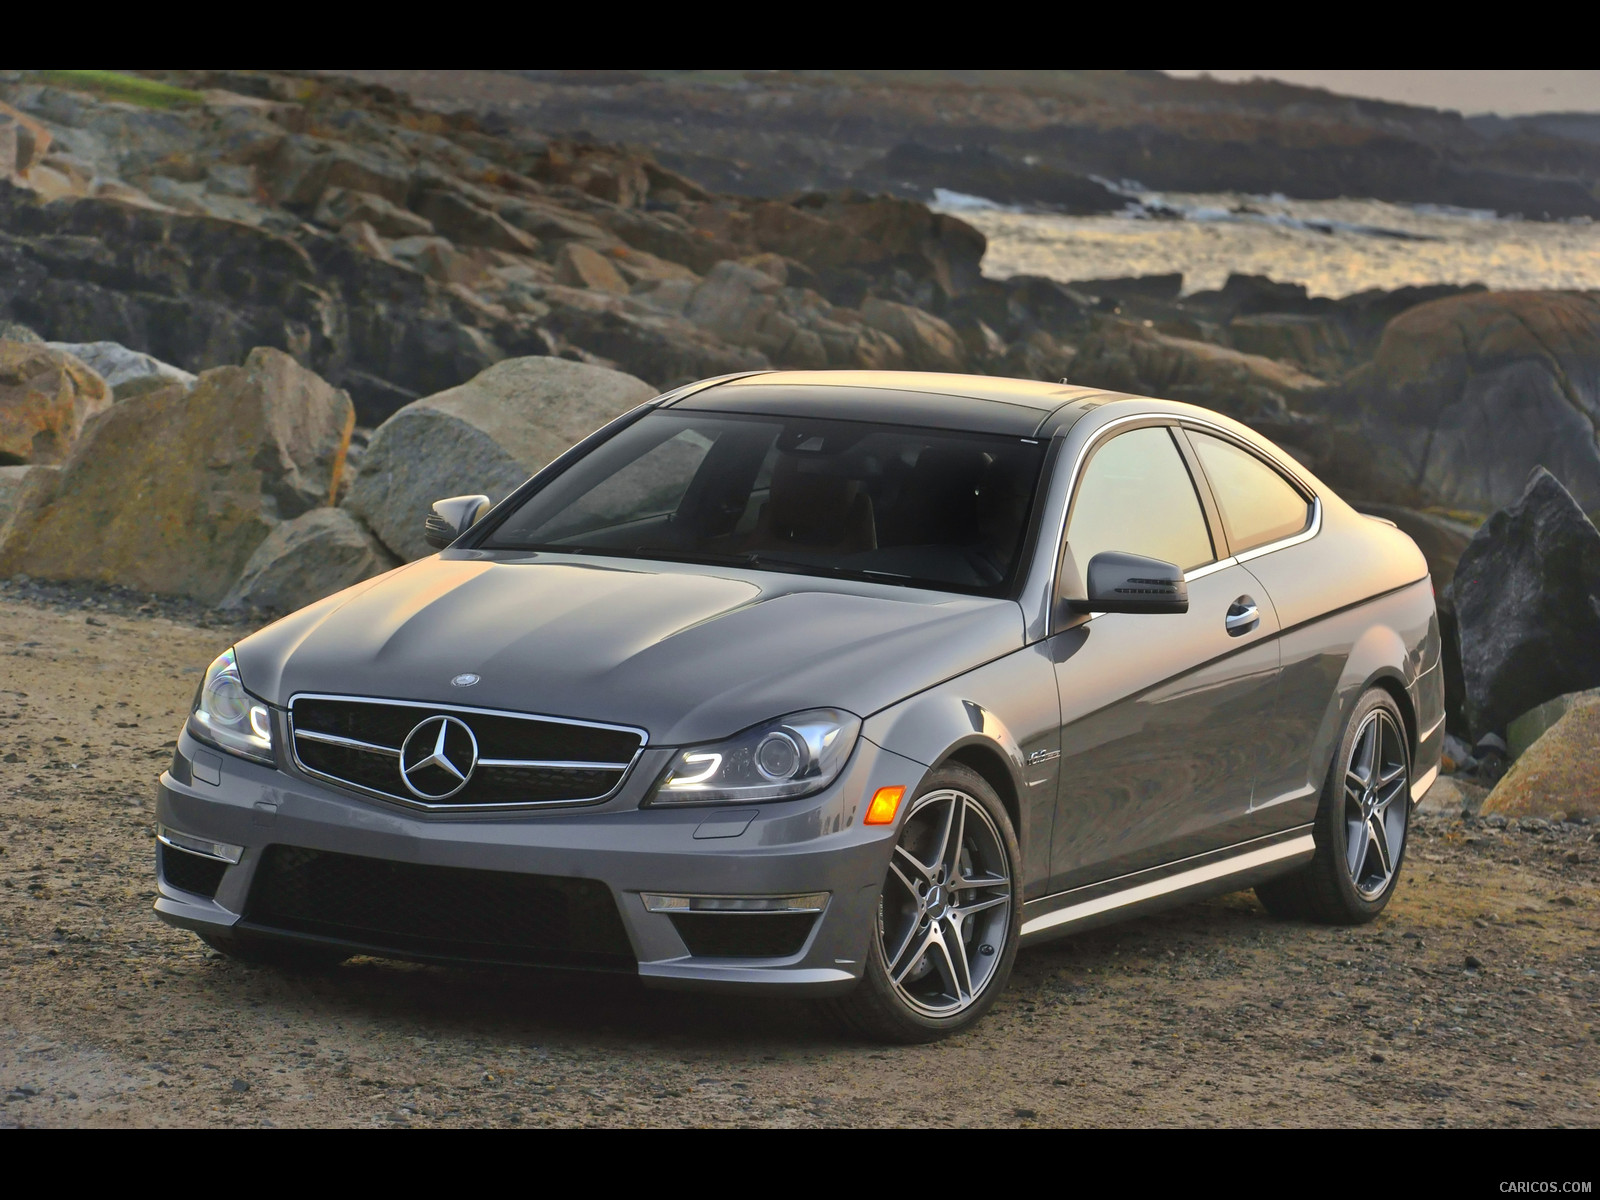 Mercedes-Benz C63 AMG Coupe (2012) with MCT transmission - , #6 of 64